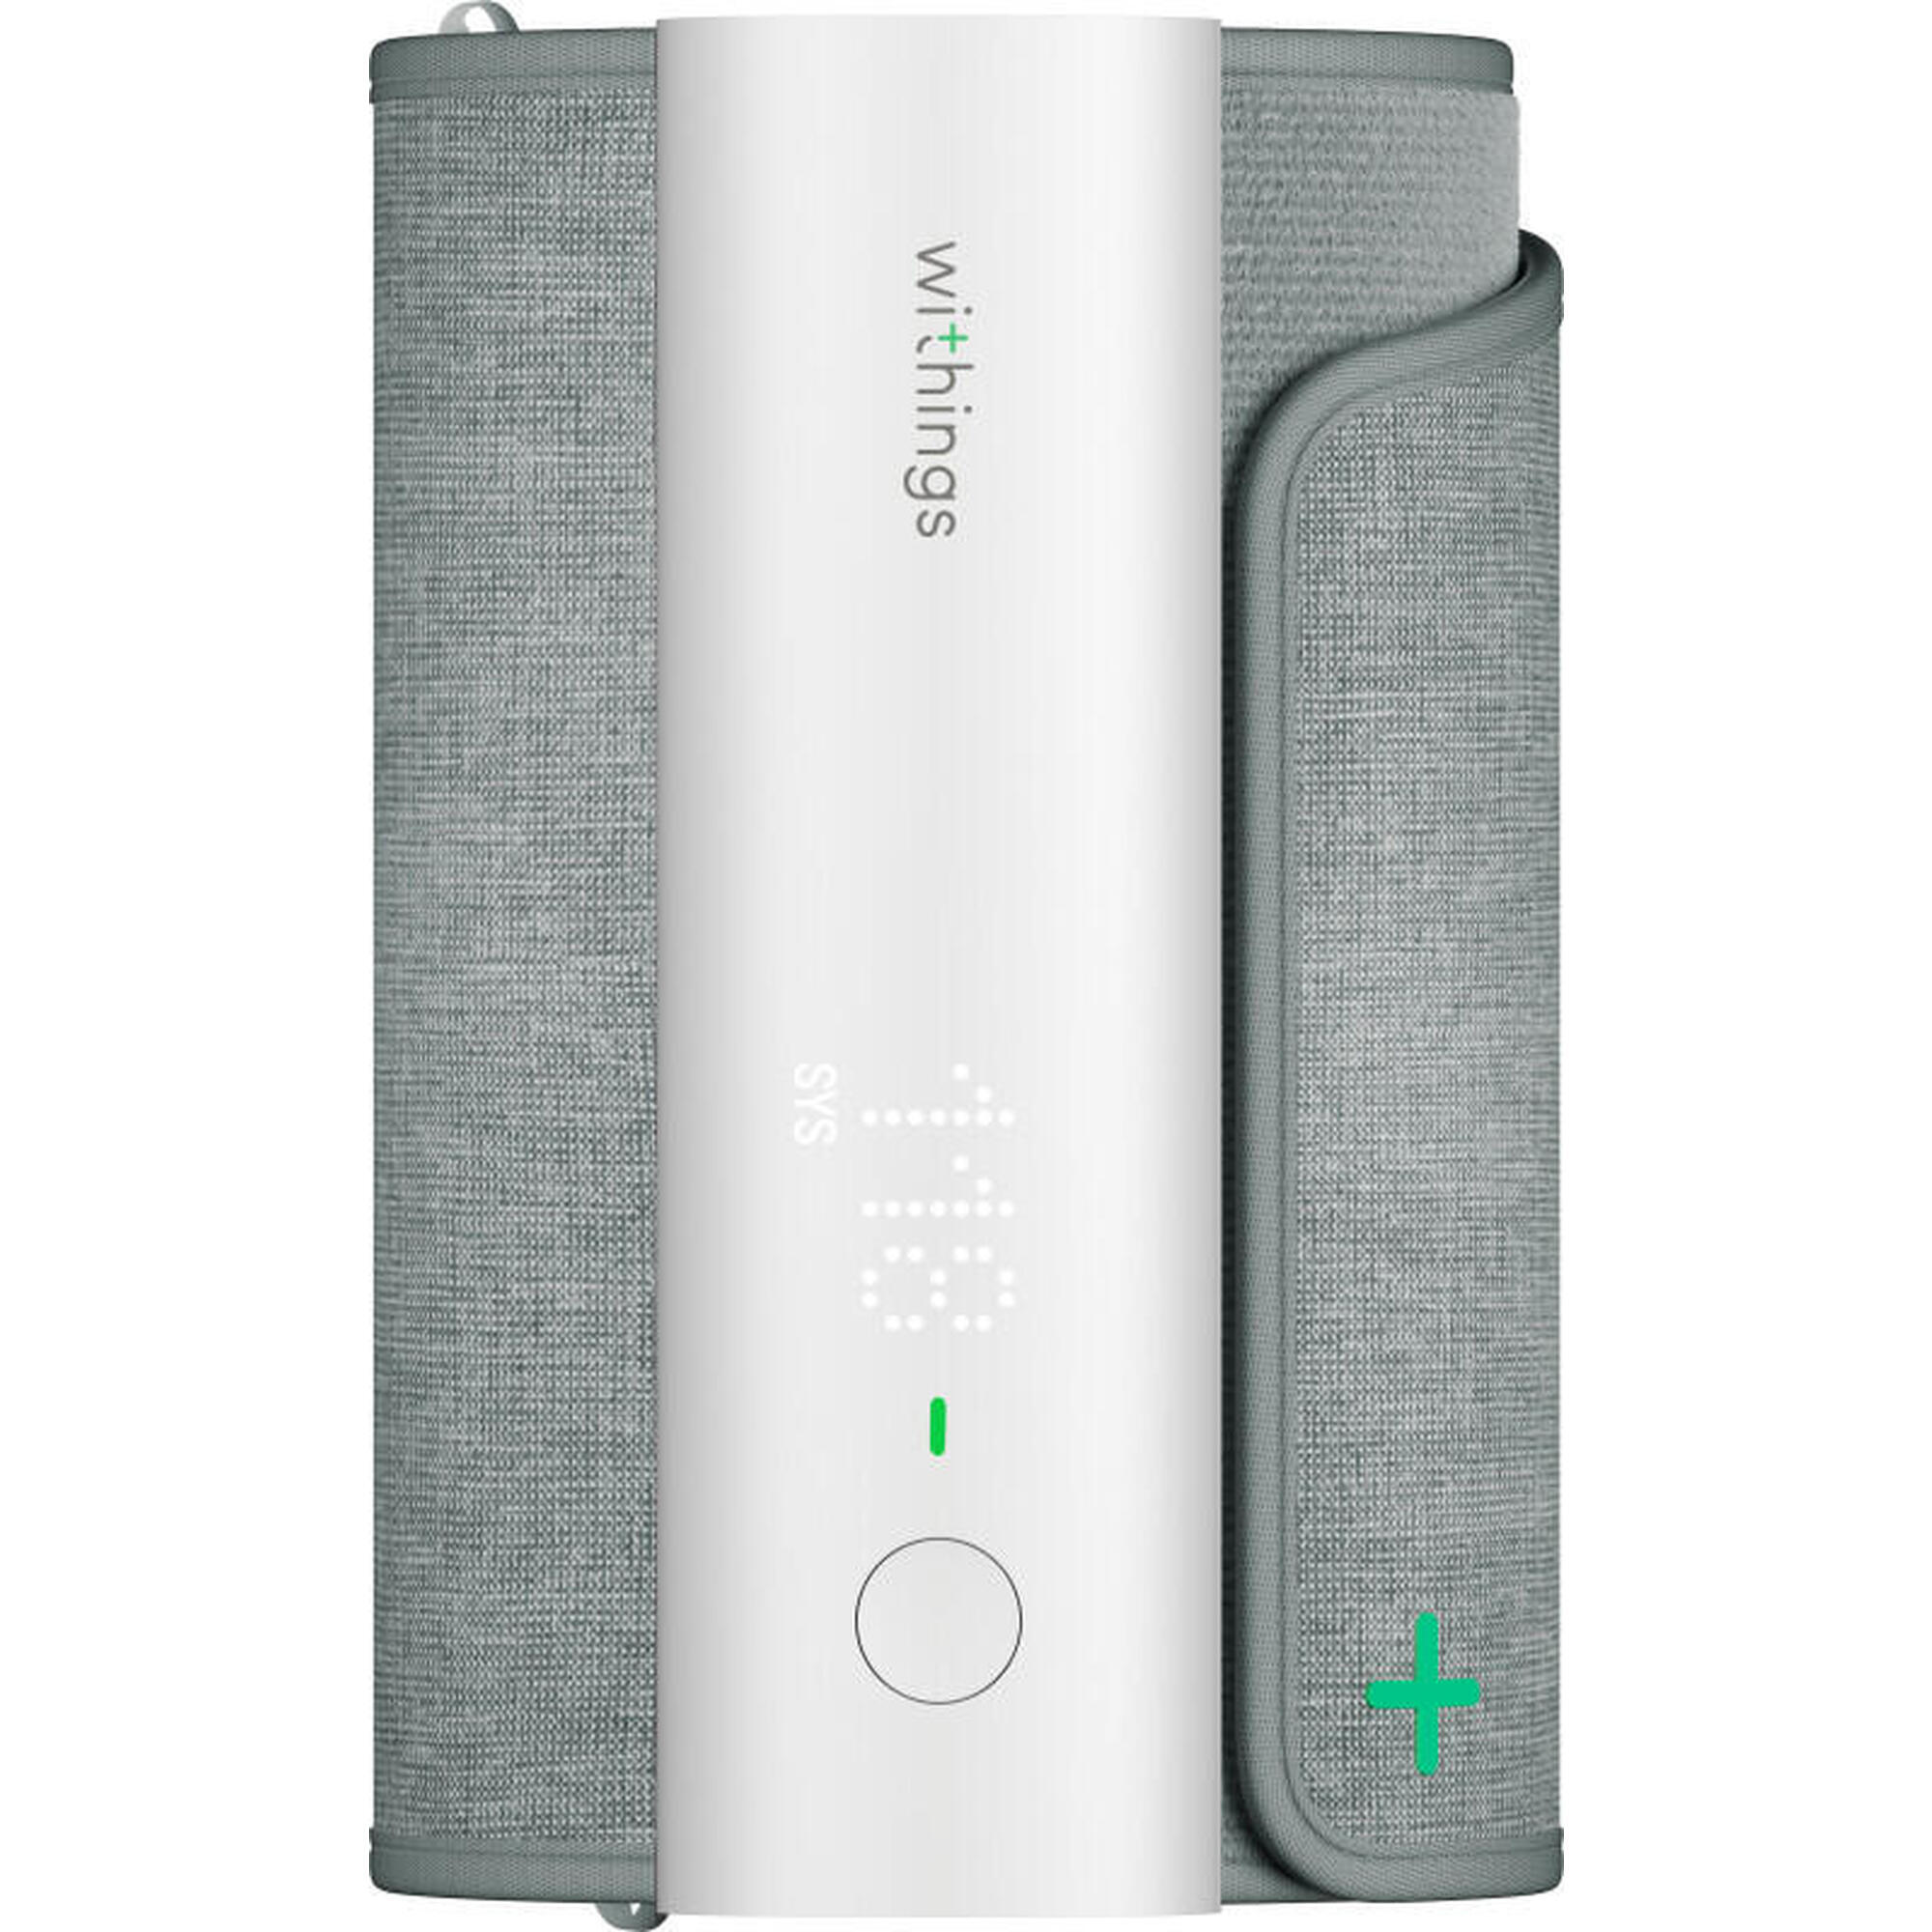 Tensiomètre connecté Withings BPM Connect